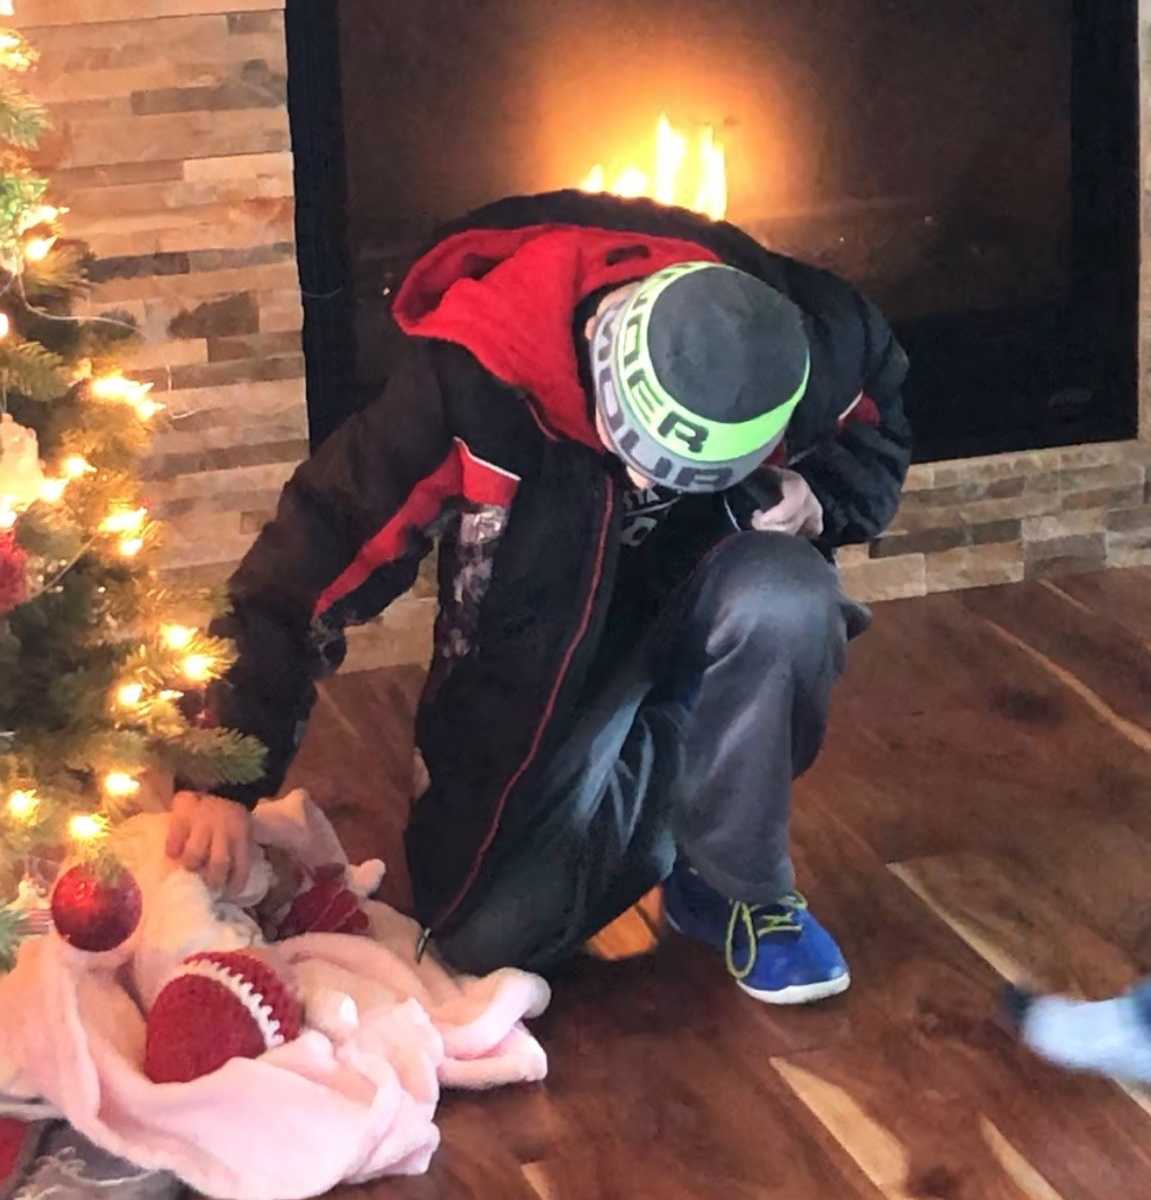 young boy kneels and touches adoptive sister lying under the Christmas tree